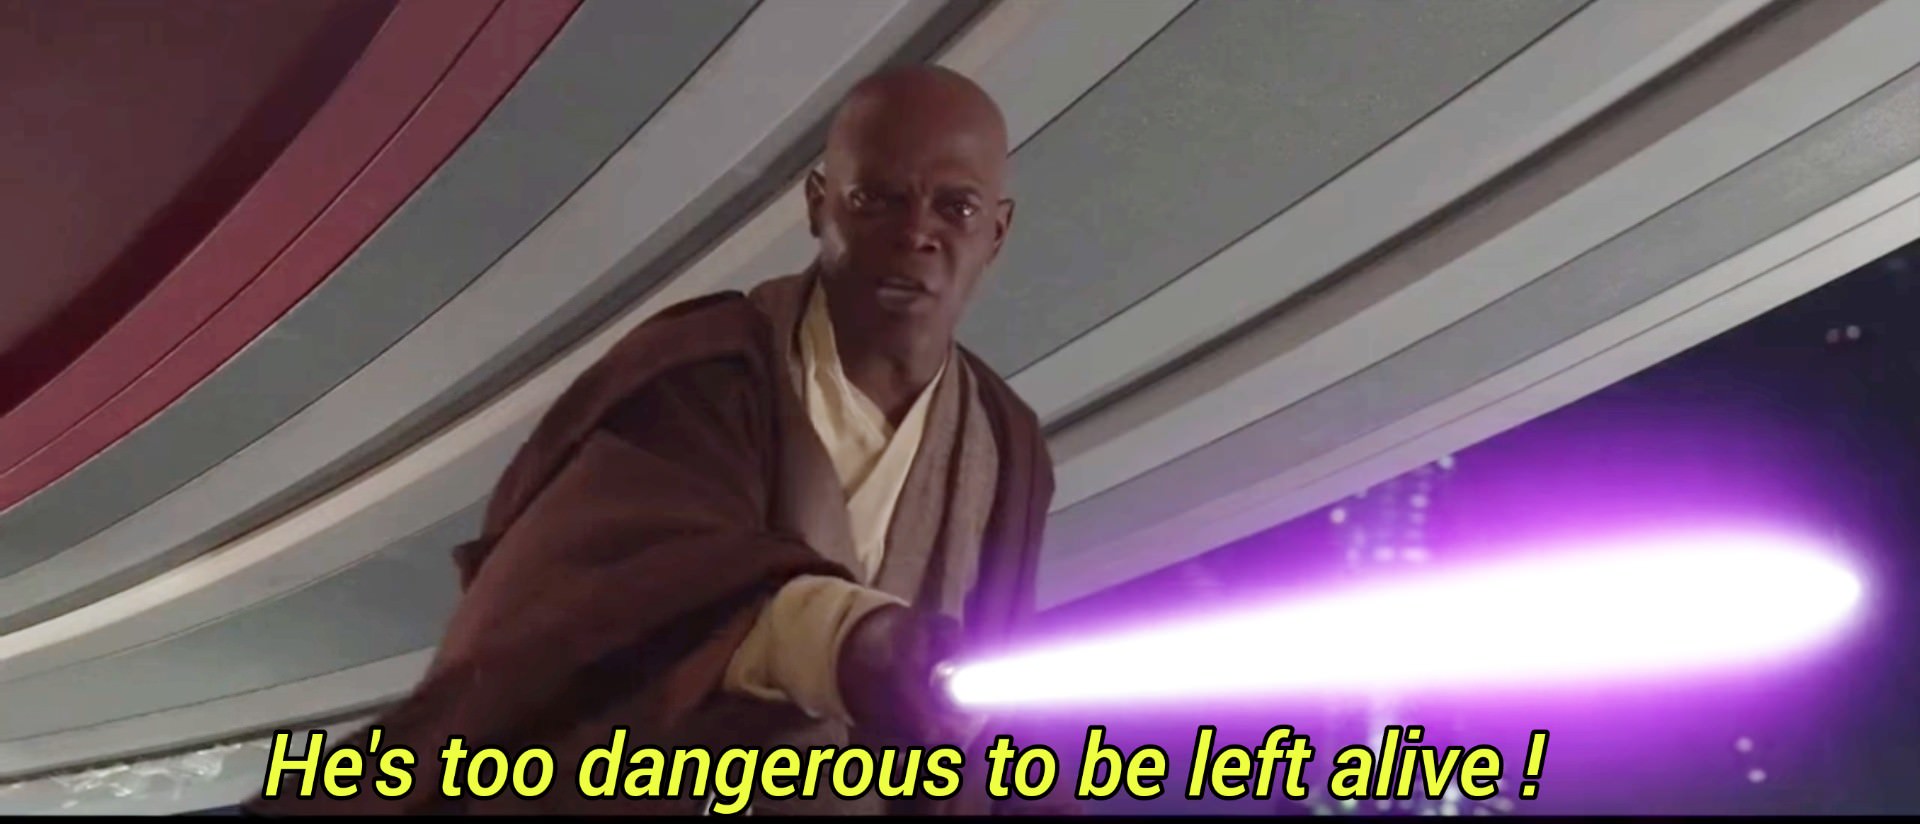 hes to dangerous to be kept alive meme Blank Meme Template